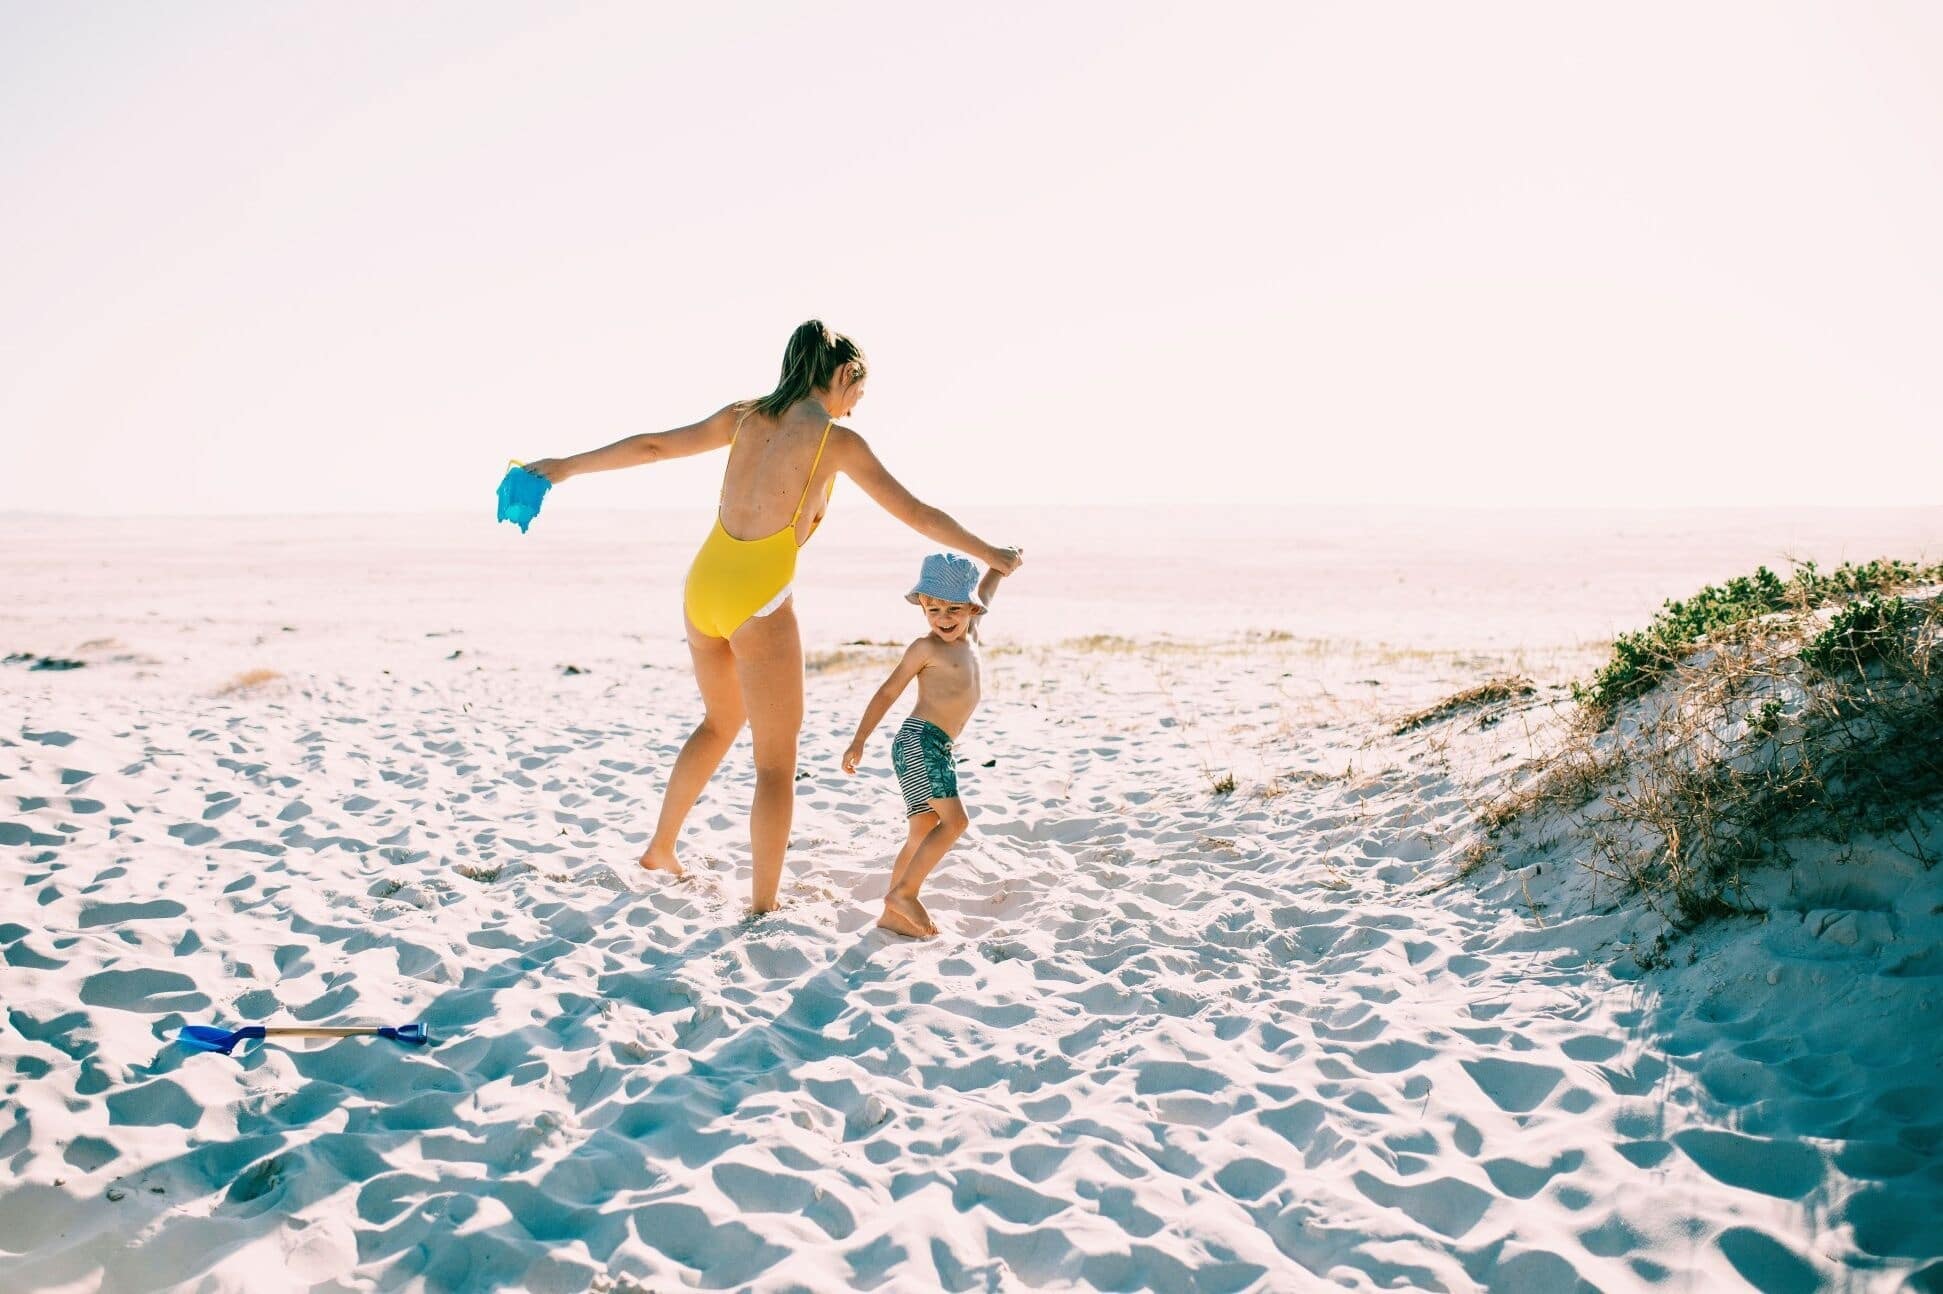 Postpartum Summer Clothes and Outfit Ideas from a Mom of 4 — A Mom Explores   Family Travel Tips, Destination Guides with Kids, Family Vacation Ideas,  and more!